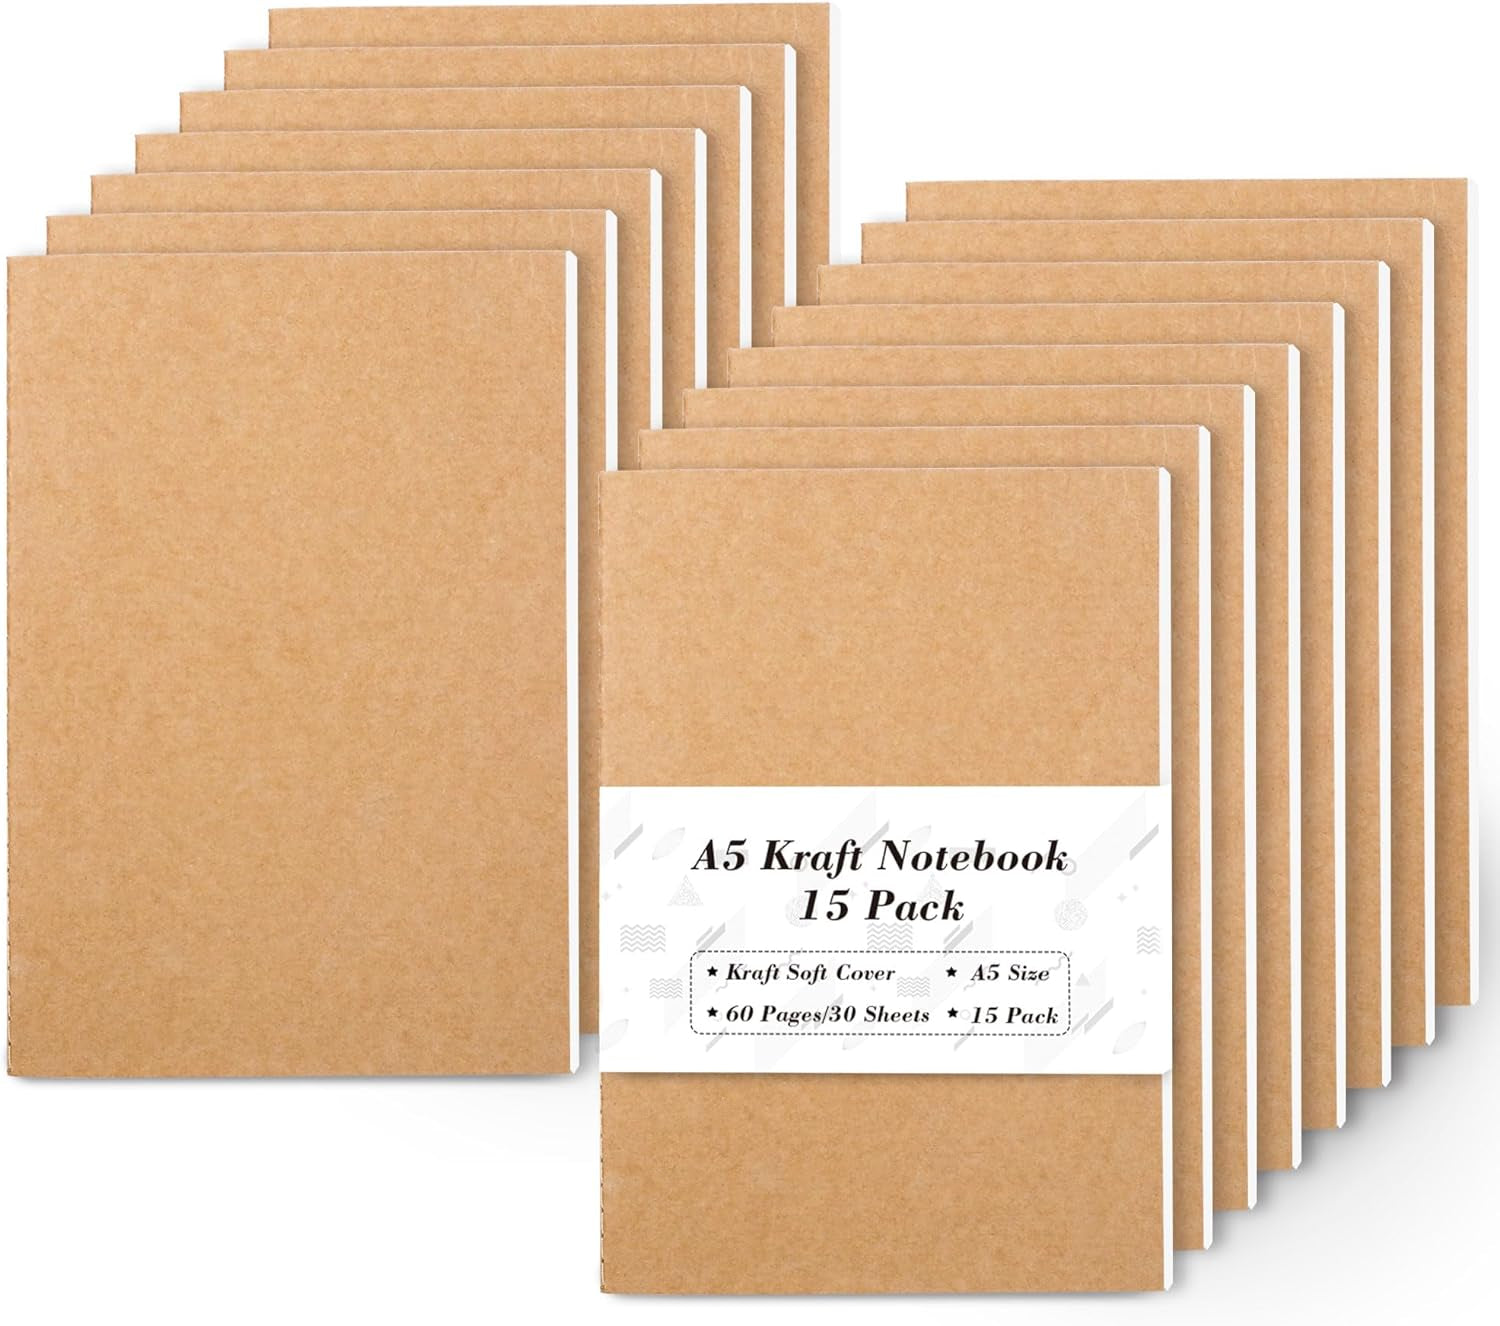 15 Pack A5 Kraft Notebooks, 60 Lined Blank Pages Travel Journal Bulk, Soft Cover Notebooks for Women Girls Students, Making Plans Writing Memos Office School Supplies, 8.3 X 5.5 In